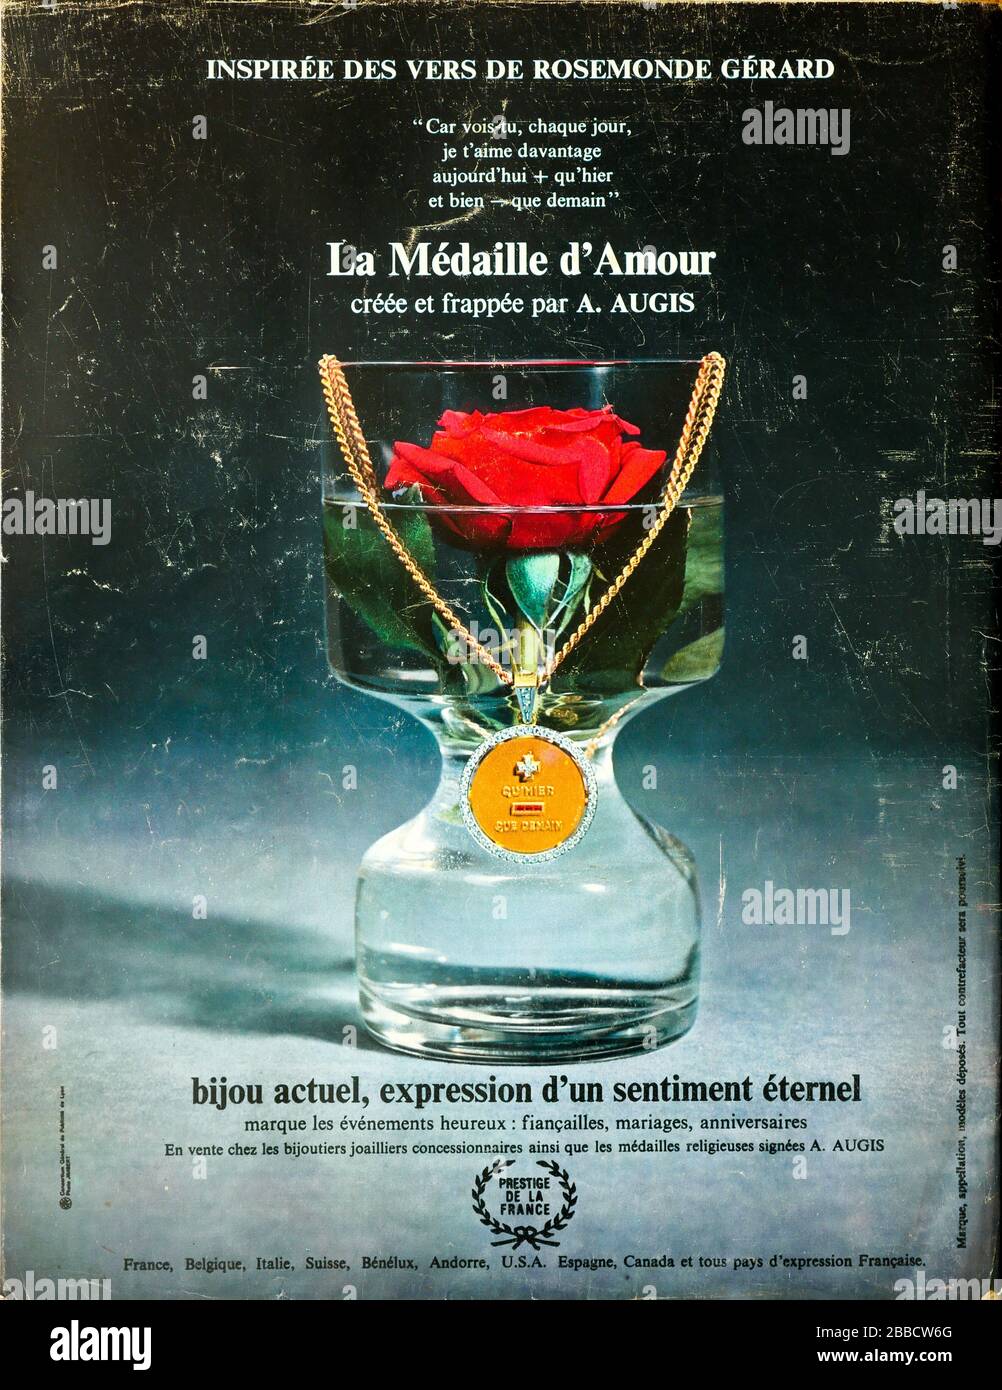 Advertising page for Augis jewelry, Backcover of French News magazine Paris- Match, 1969, France Stock Photo - Alamy